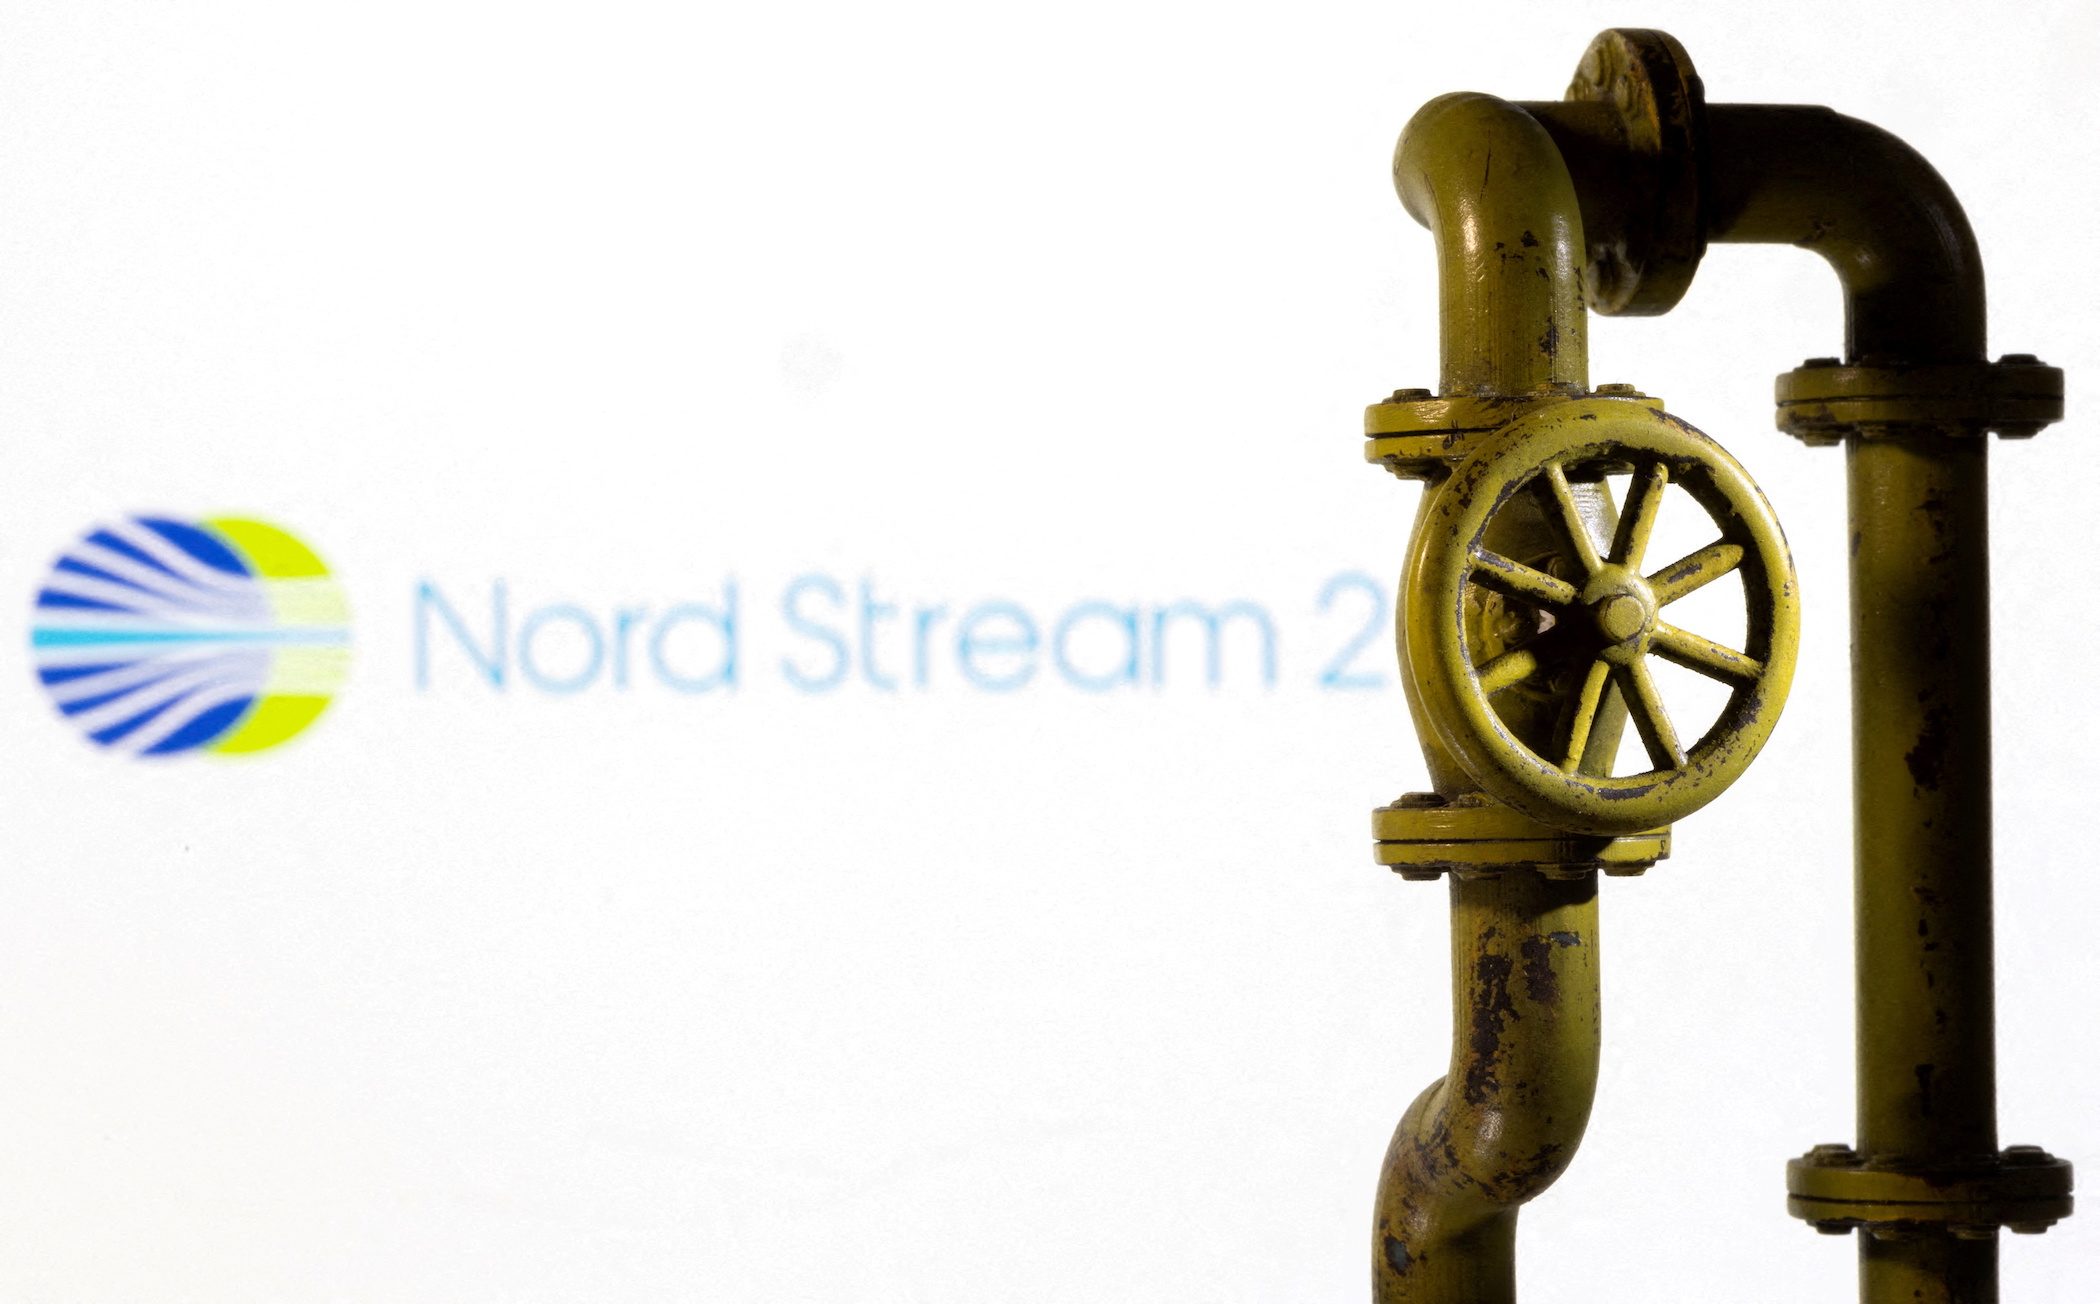 Suspension, sanctions, lawsuits: Germany’s Nord Stream 2 headache